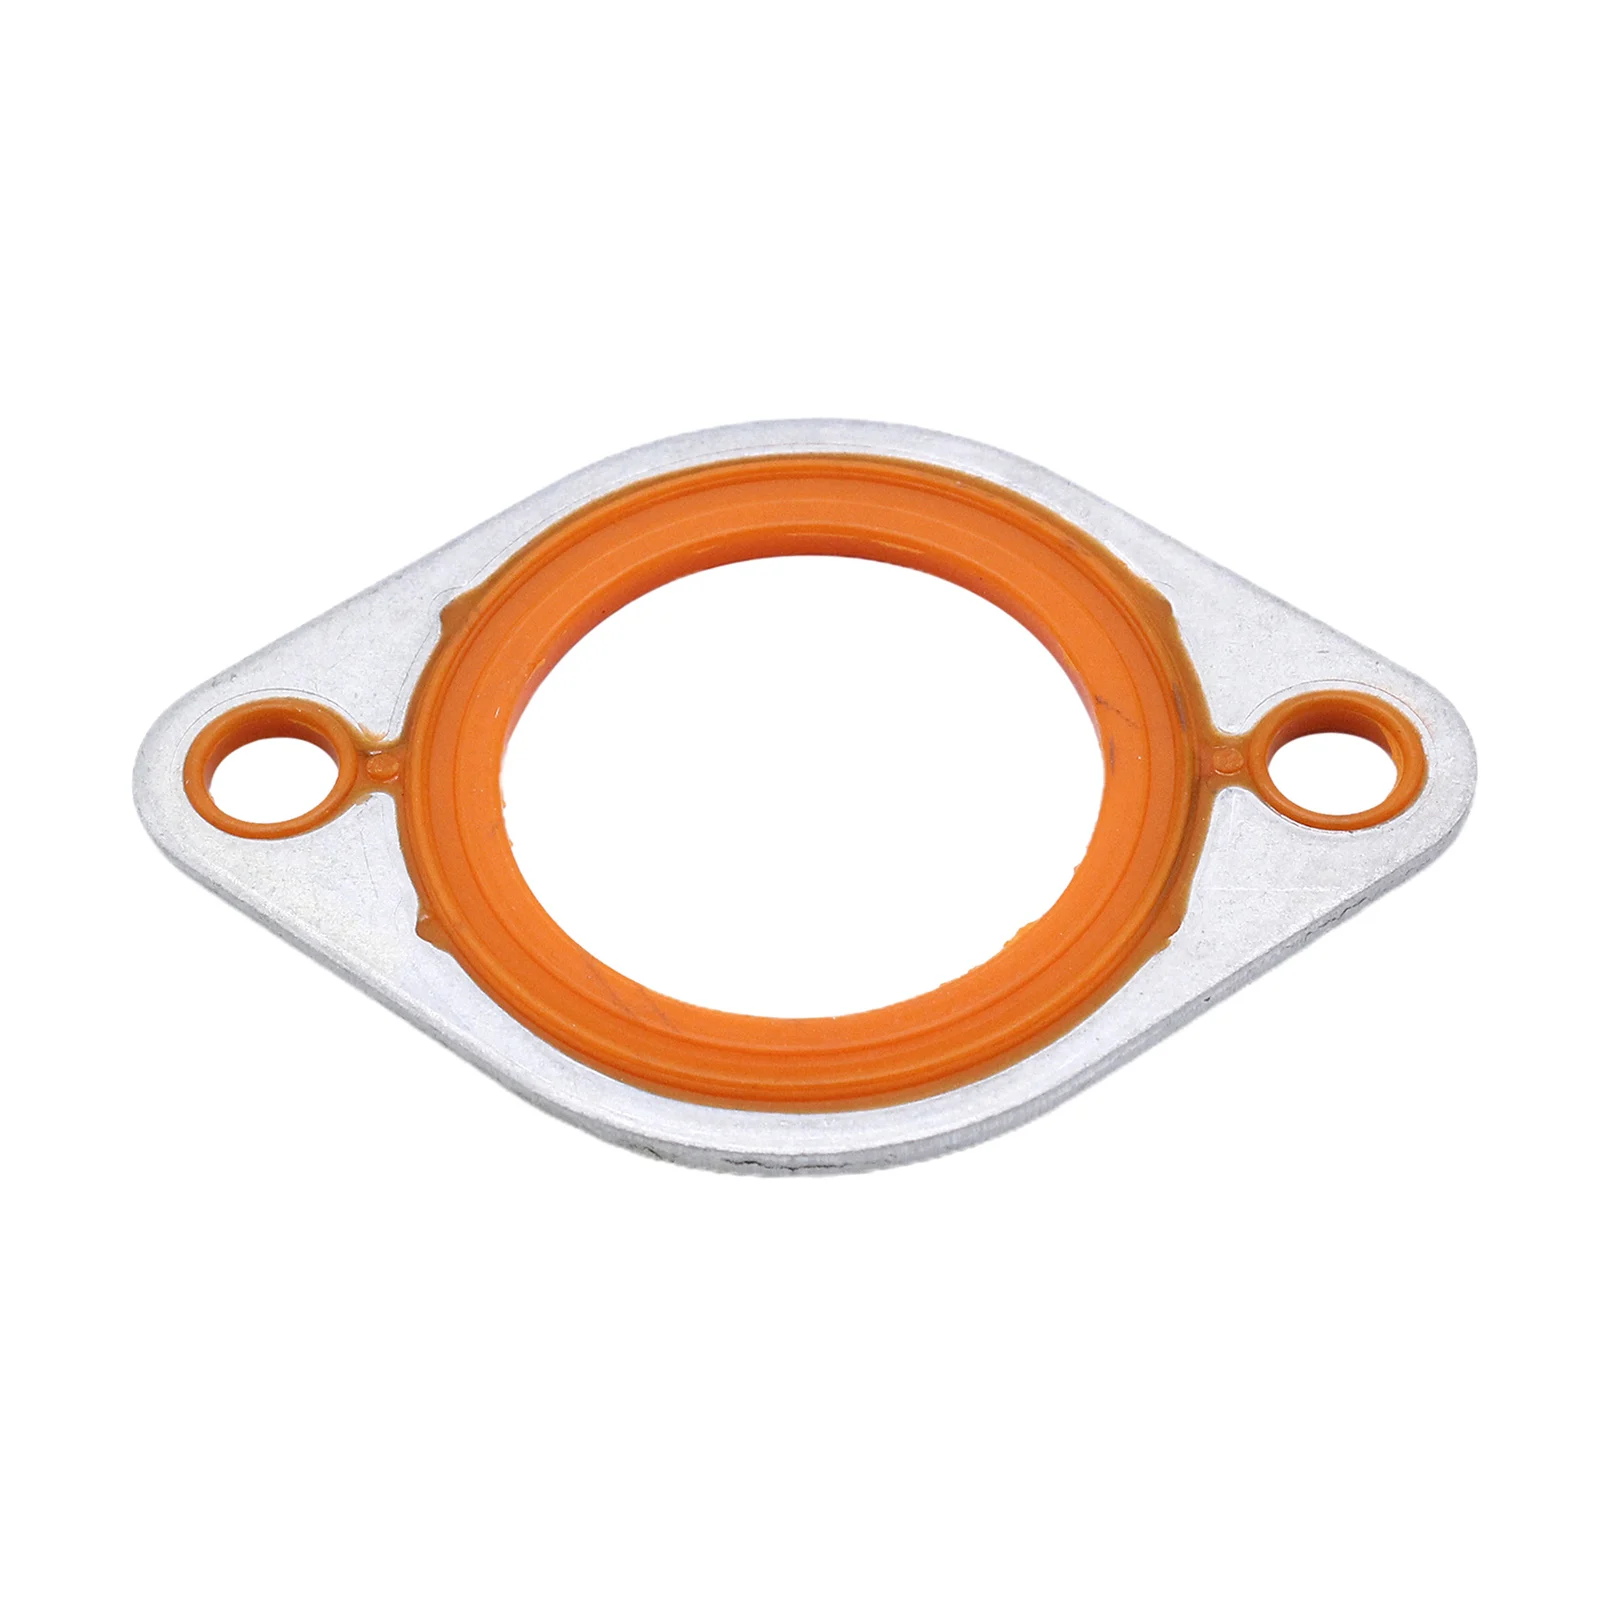 Thermostat Water Neck Housing Gasket for Chevy SBC BBC 283 327 350 383 400 454 502 Aluminum/Silicone Replacement Parts